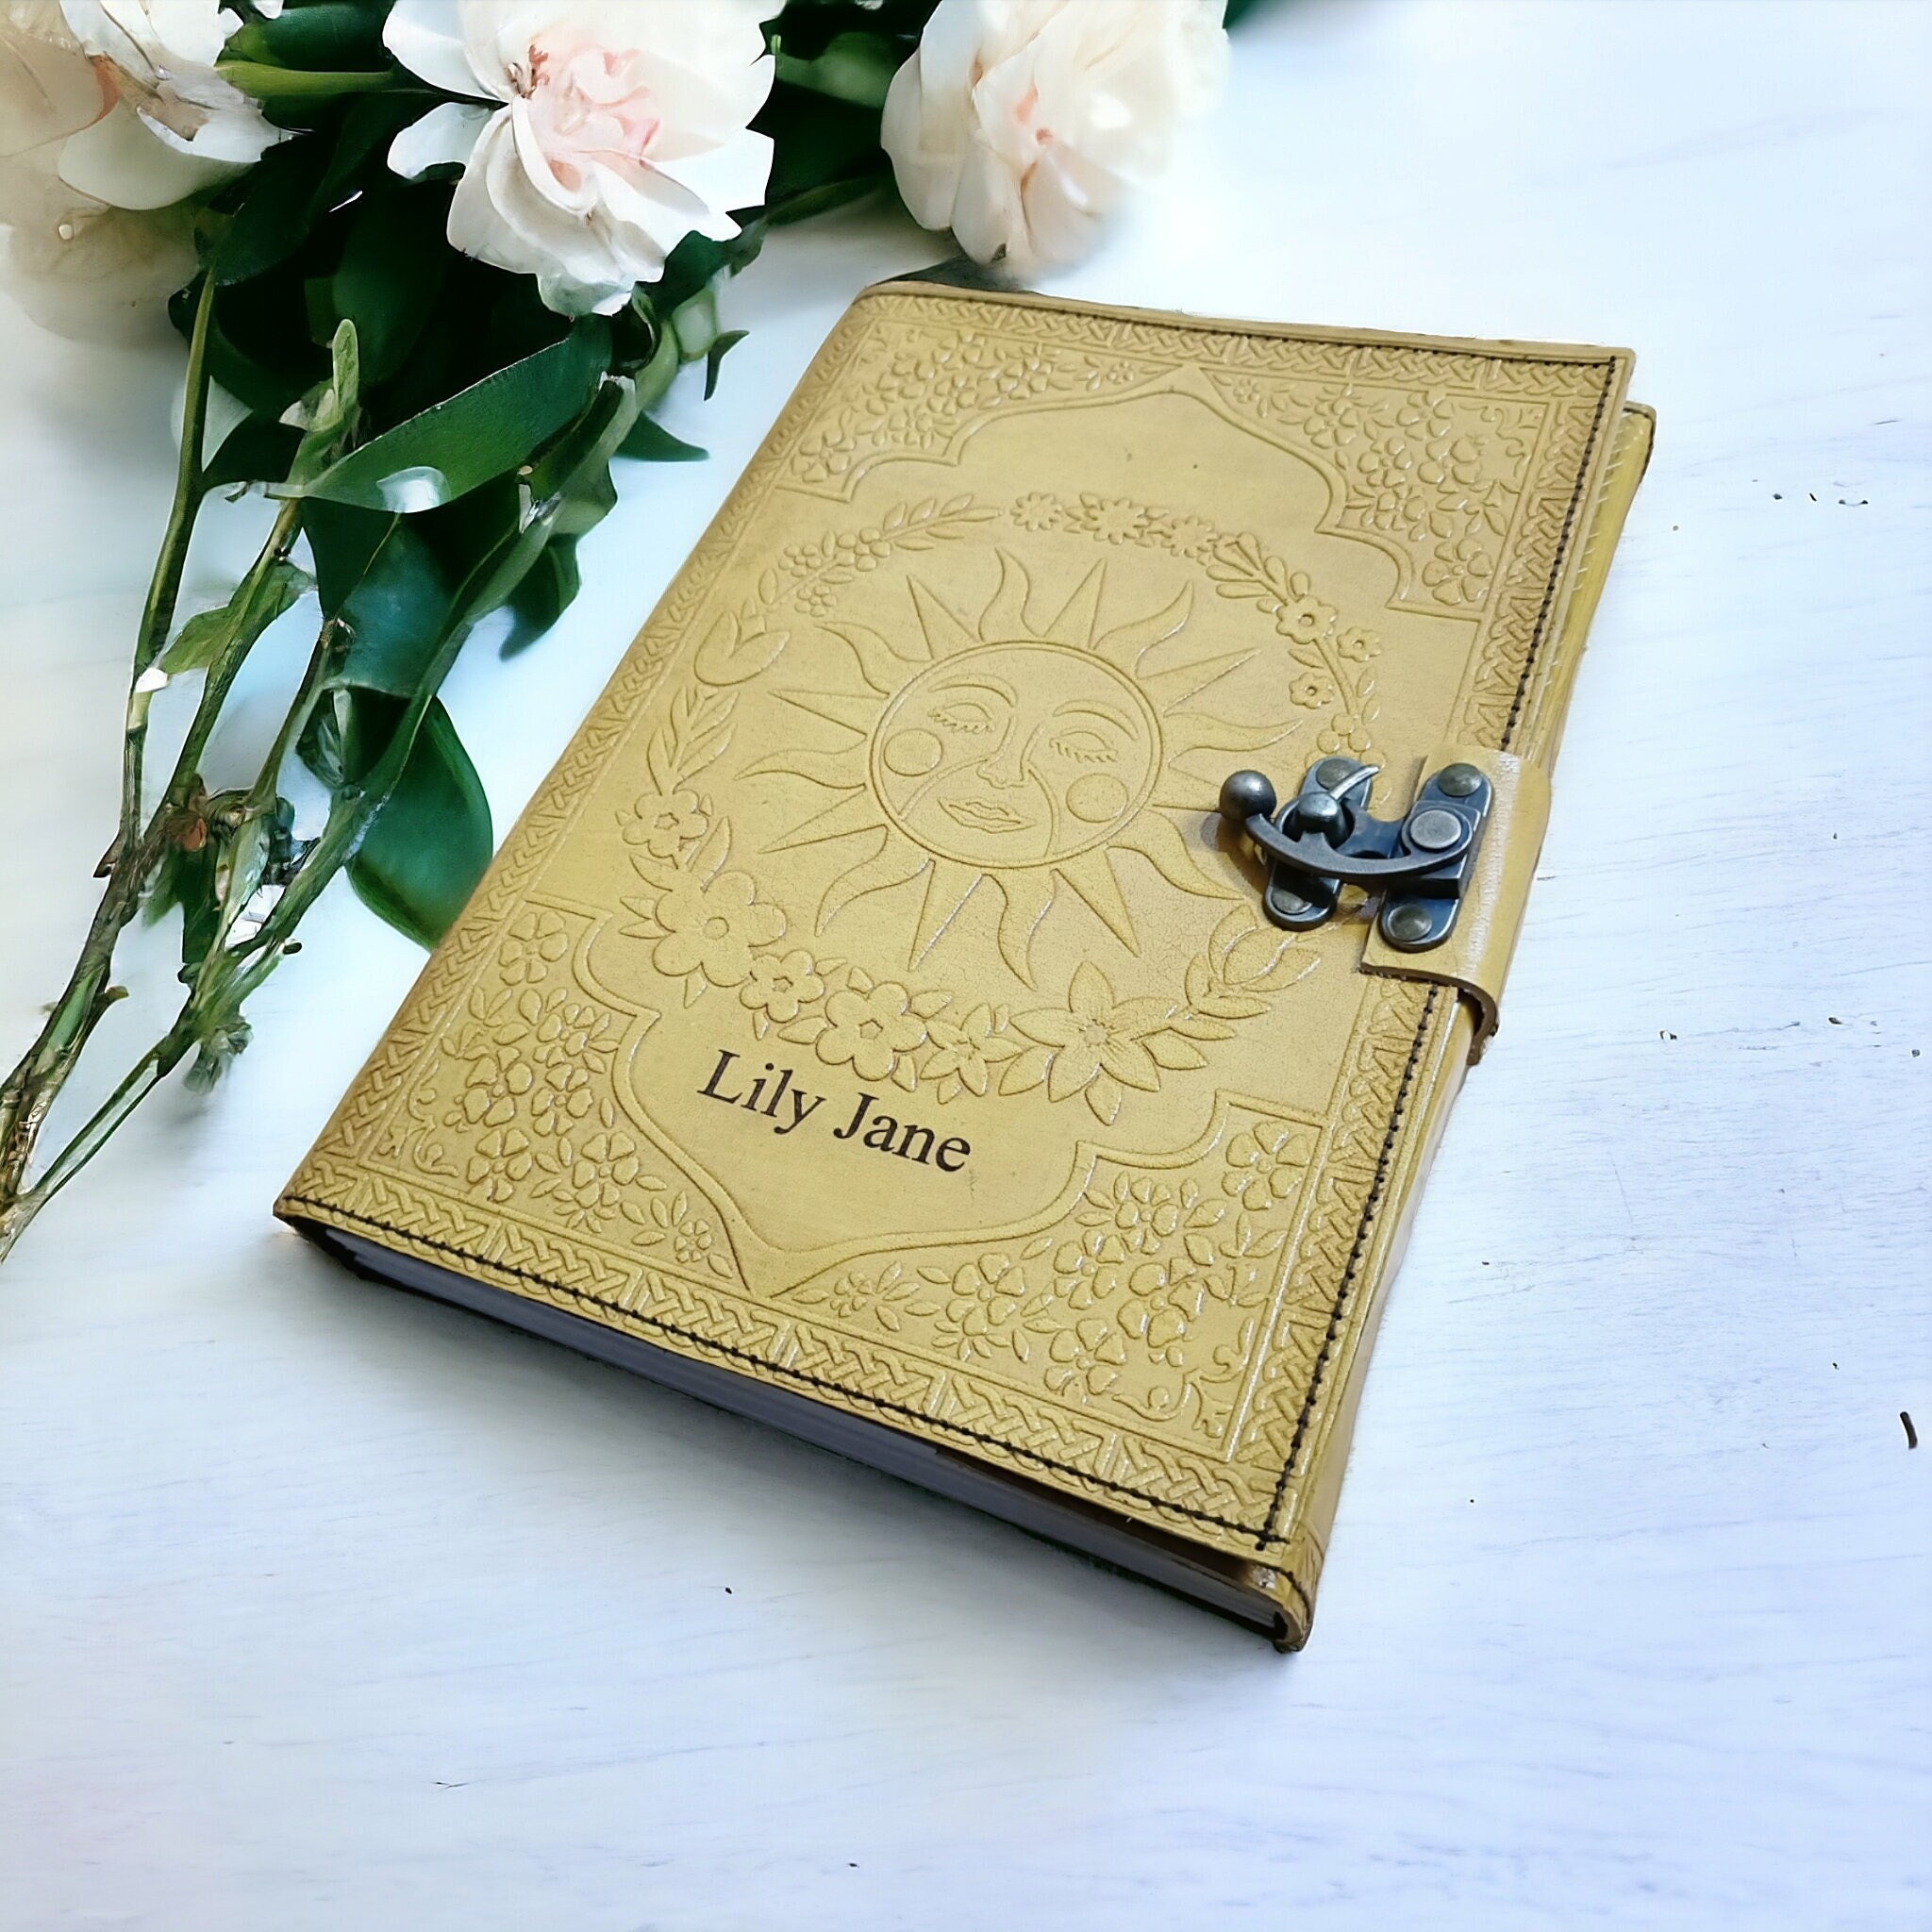 Sun and Moon Celestial Journal  Notebook with Latch Closure